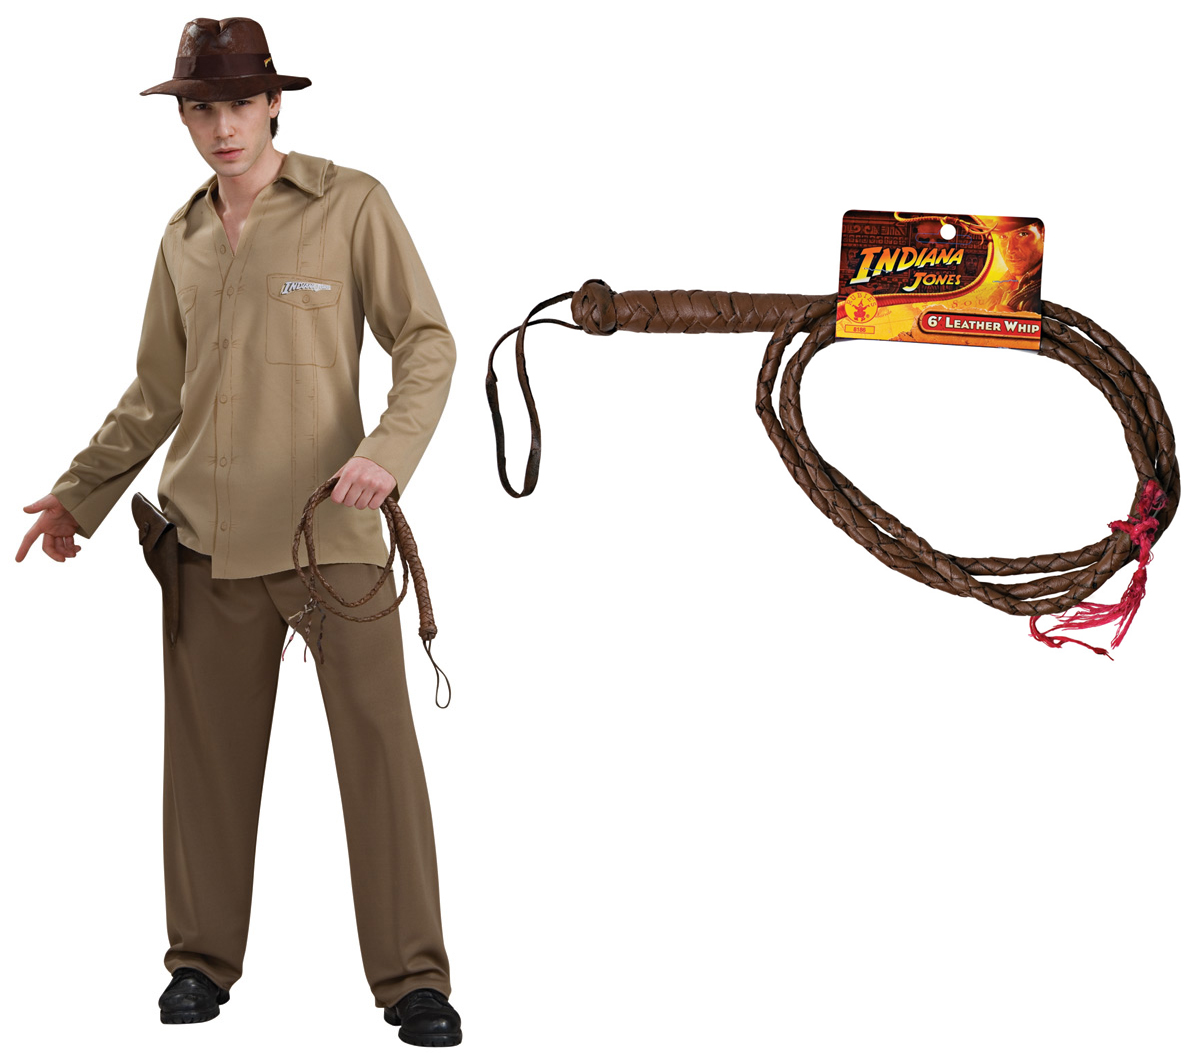 Indiana Jones Adult Costume STD, XL + Leather Whip - Click Image to Close